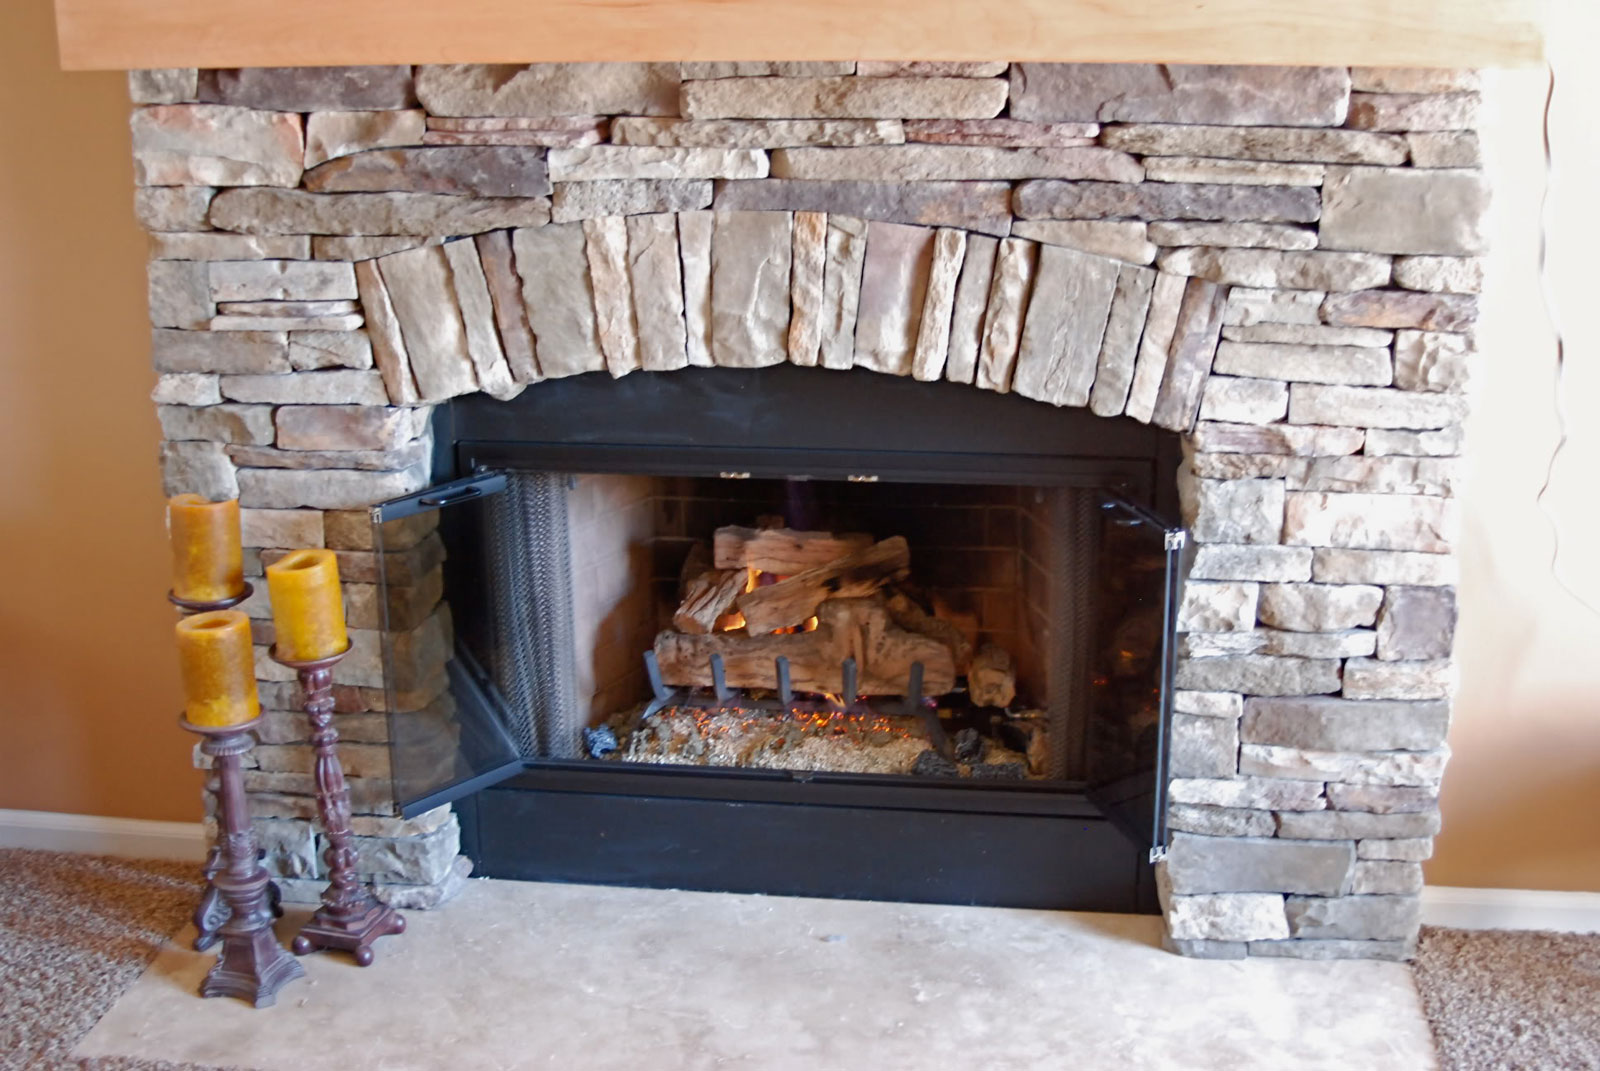 Cobblestone Stone For Unique Cobblestone Stone Fireplace Design For Home Interior Traditional Living Room With Rustic Candlesitcks And Grey Carpet Living Room  Stone Fireplace Design Providing Warmth For Living Room 